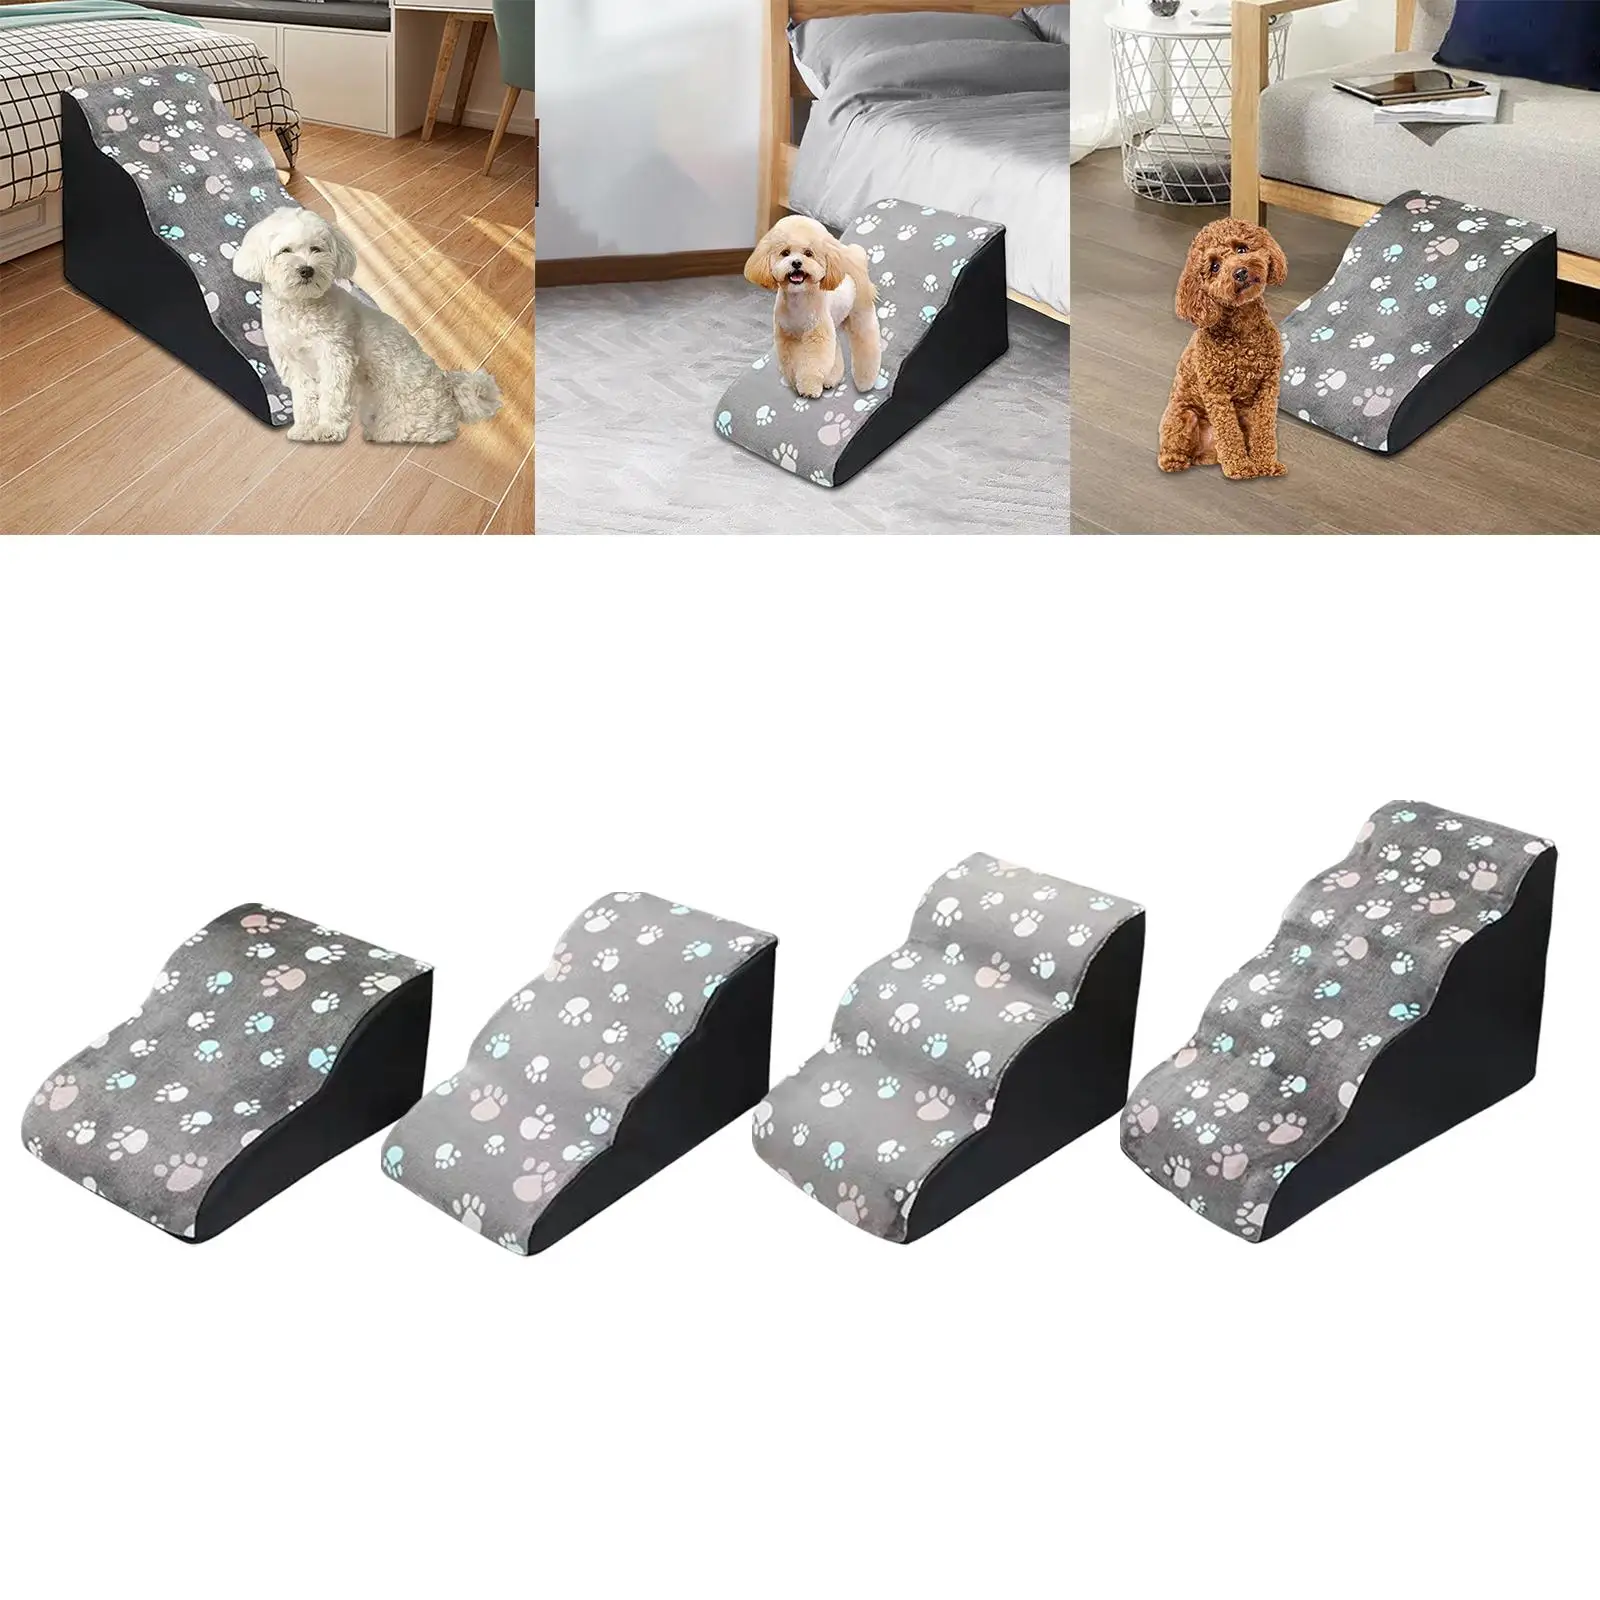 Pet Dog Stairs with Removable Cover Ramp Ladder Portable for Older Dogs